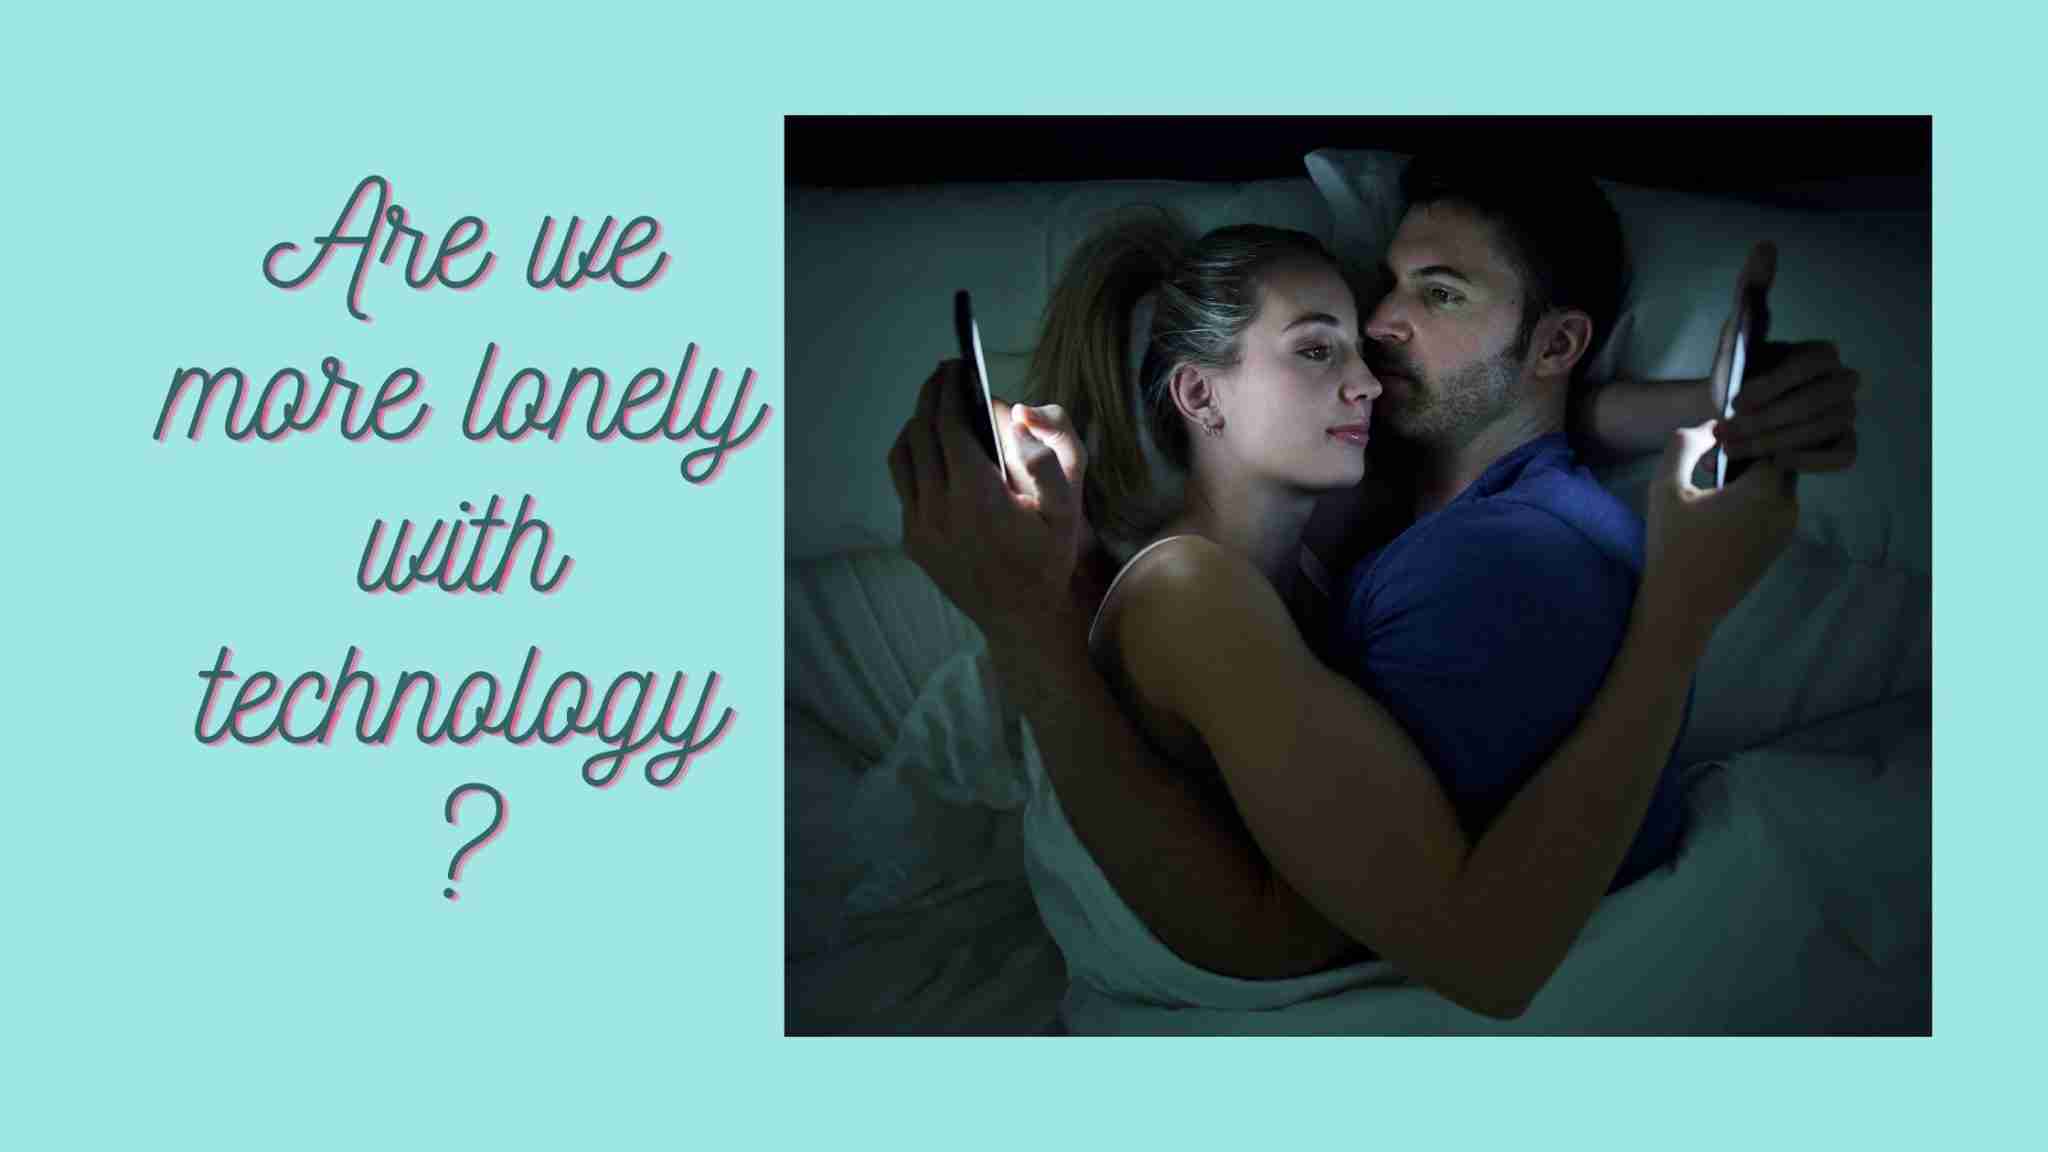 Does technology make us more alone?